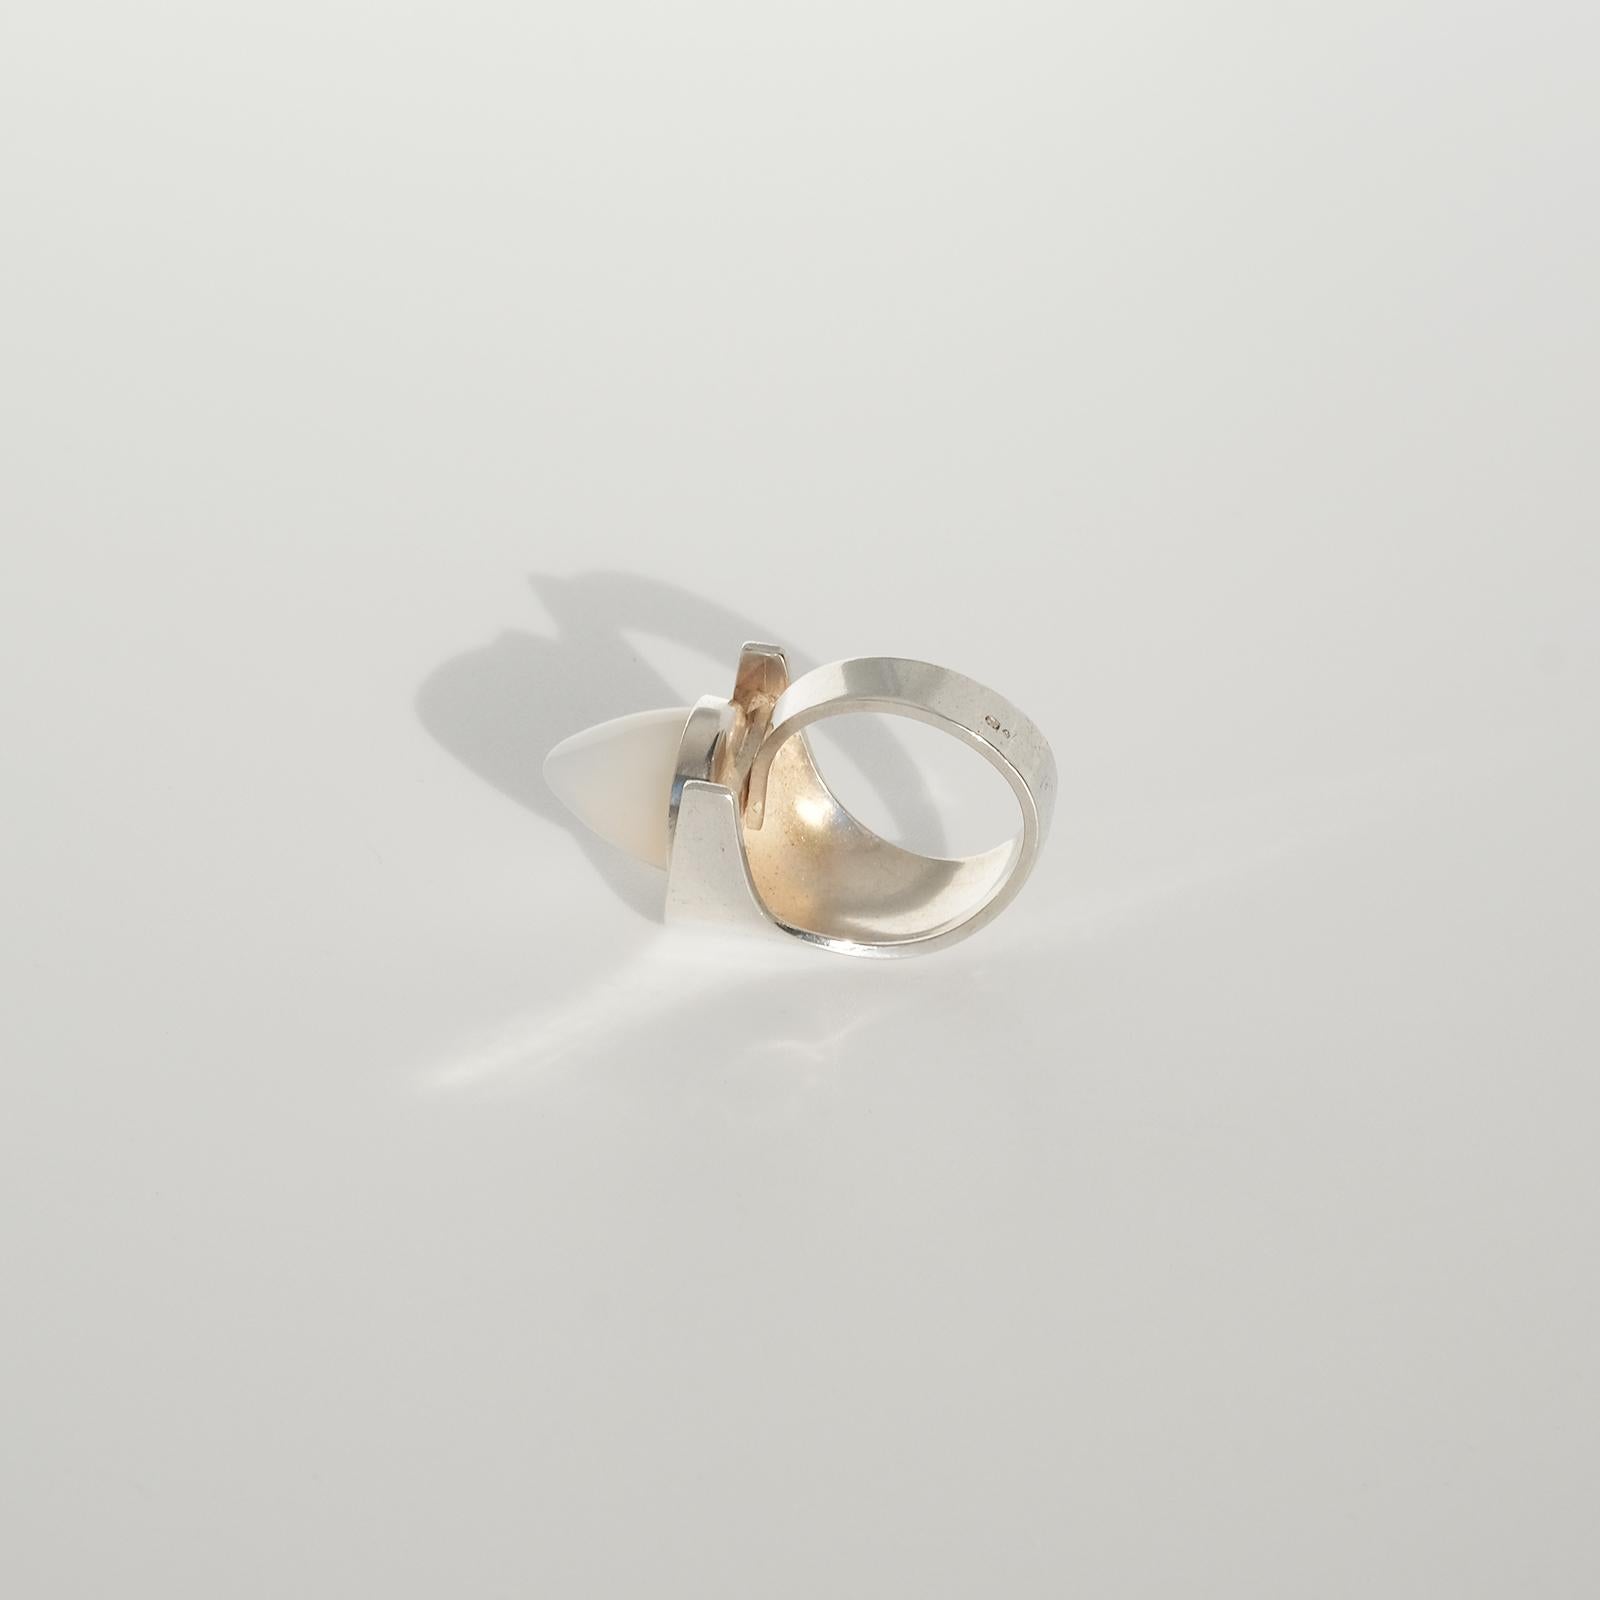 Modernistic Finnish Silver Ring with a Moonstone, 1960s 5